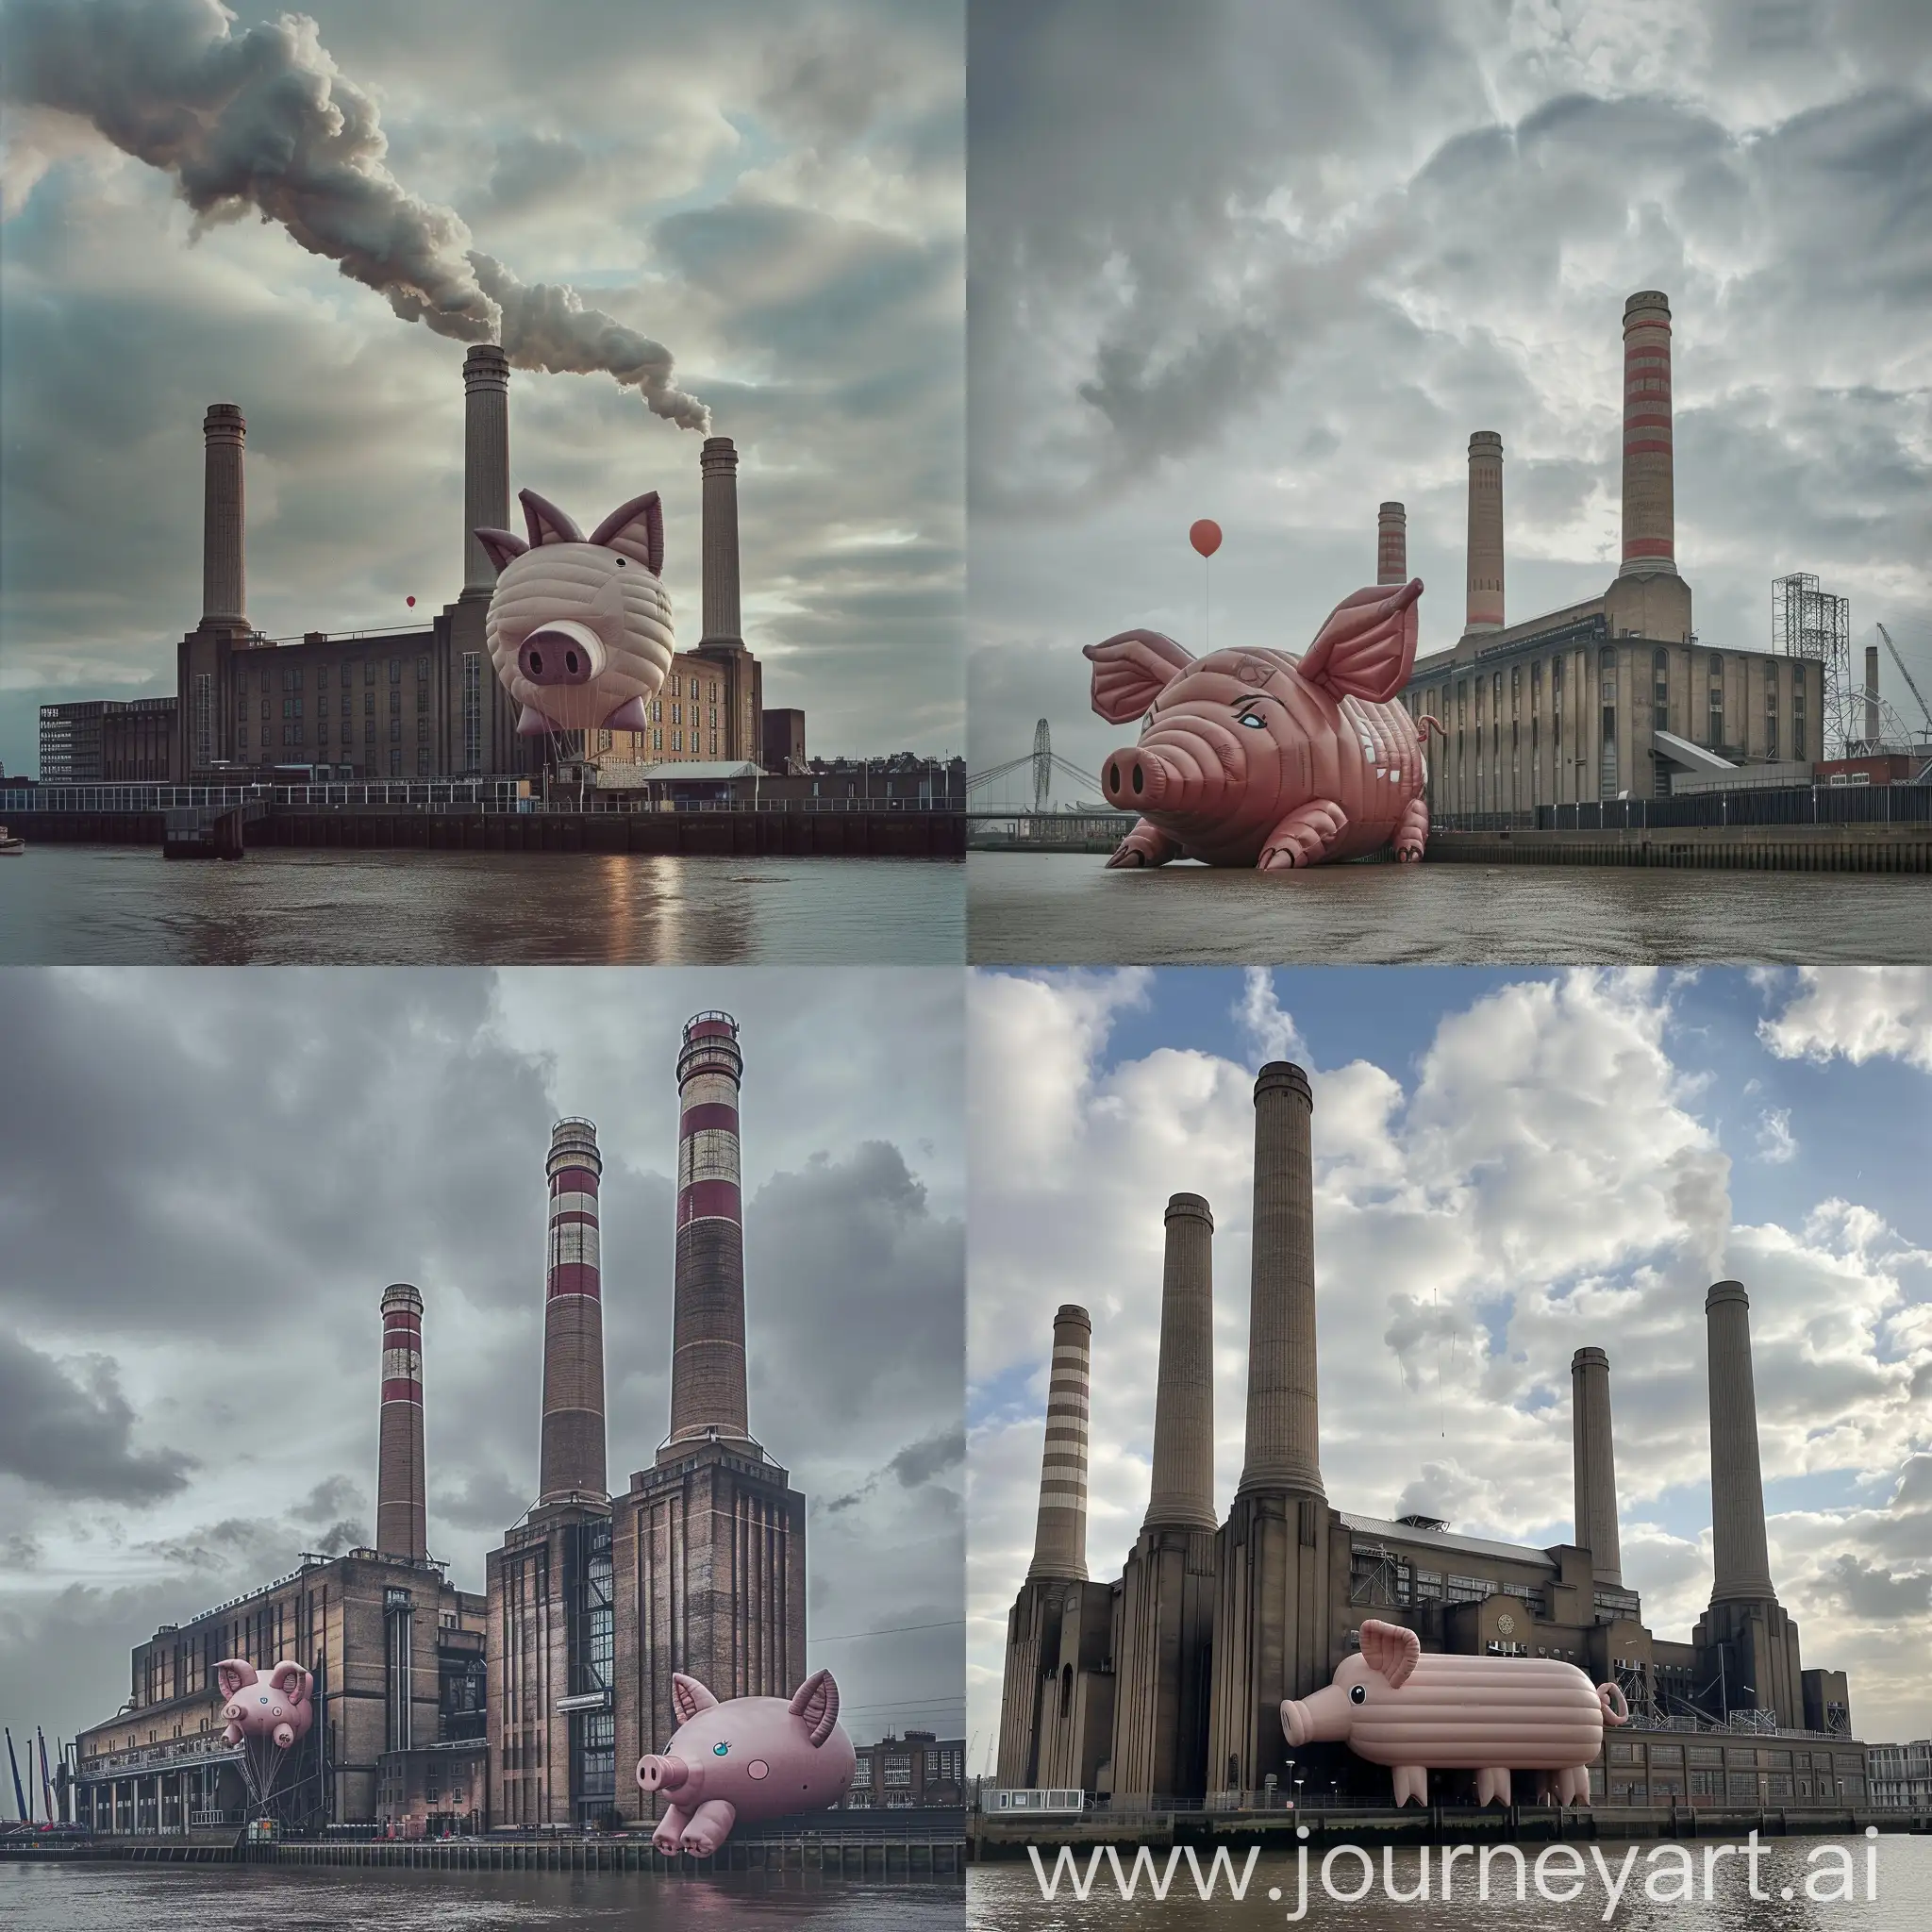 Iconic-Battersea-Power-Station-with-Inflatable-Pig-Balloon